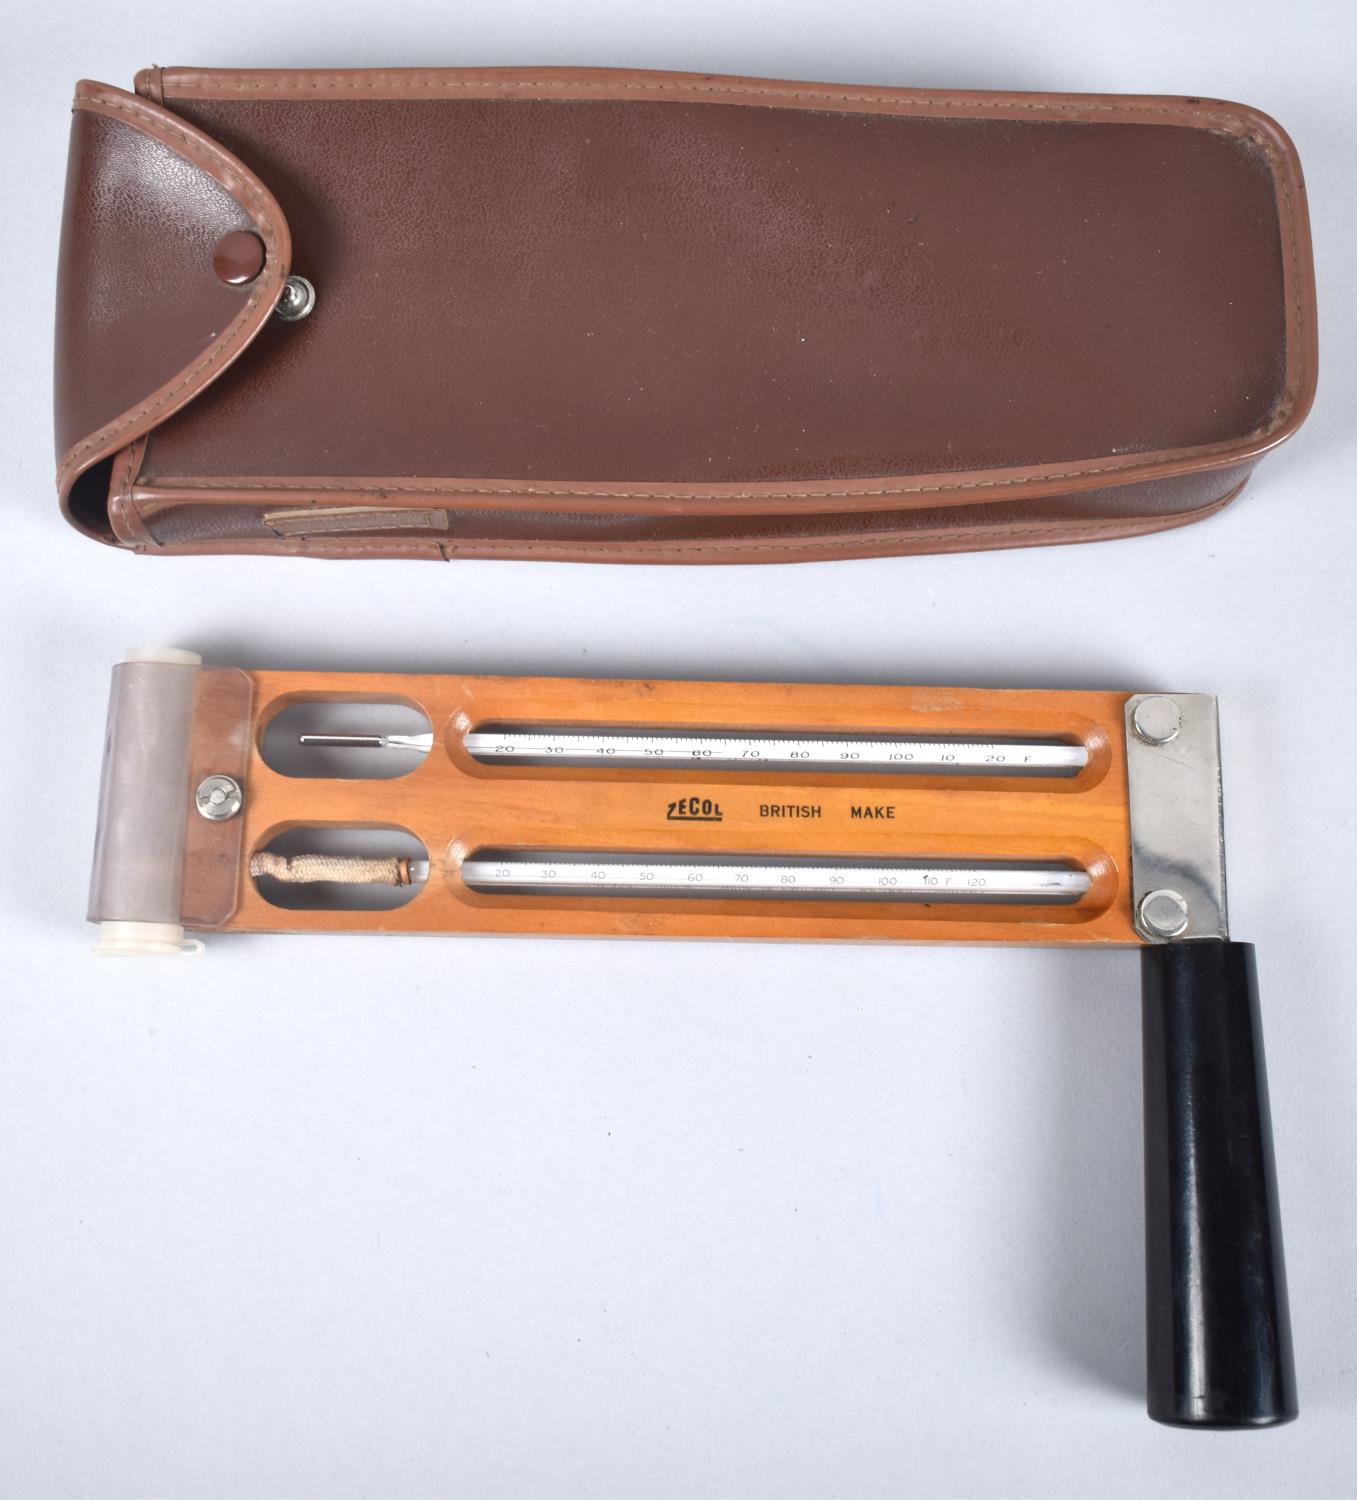 A Leather Cased Zecol Handheld Rotary Air Thermometer with Tubes for Fahrenheit and Centigrade